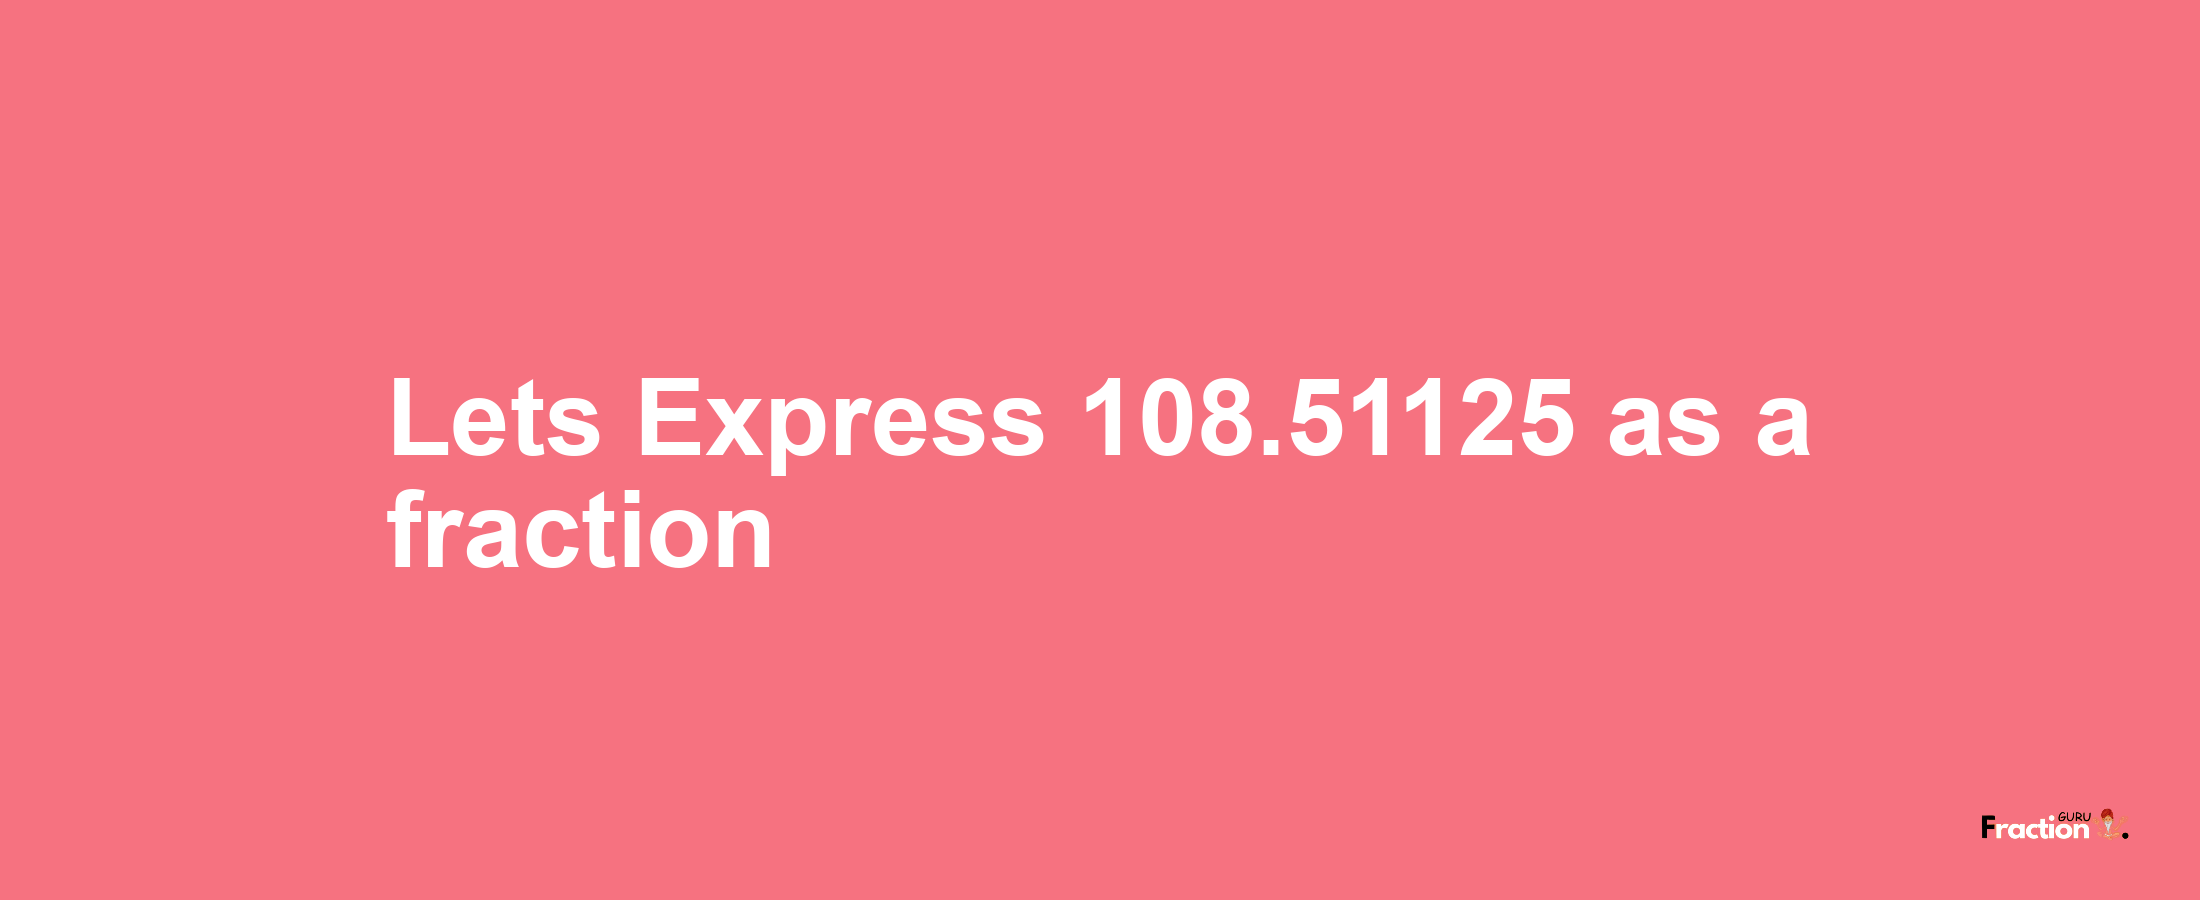 Lets Express 108.51125 as afraction